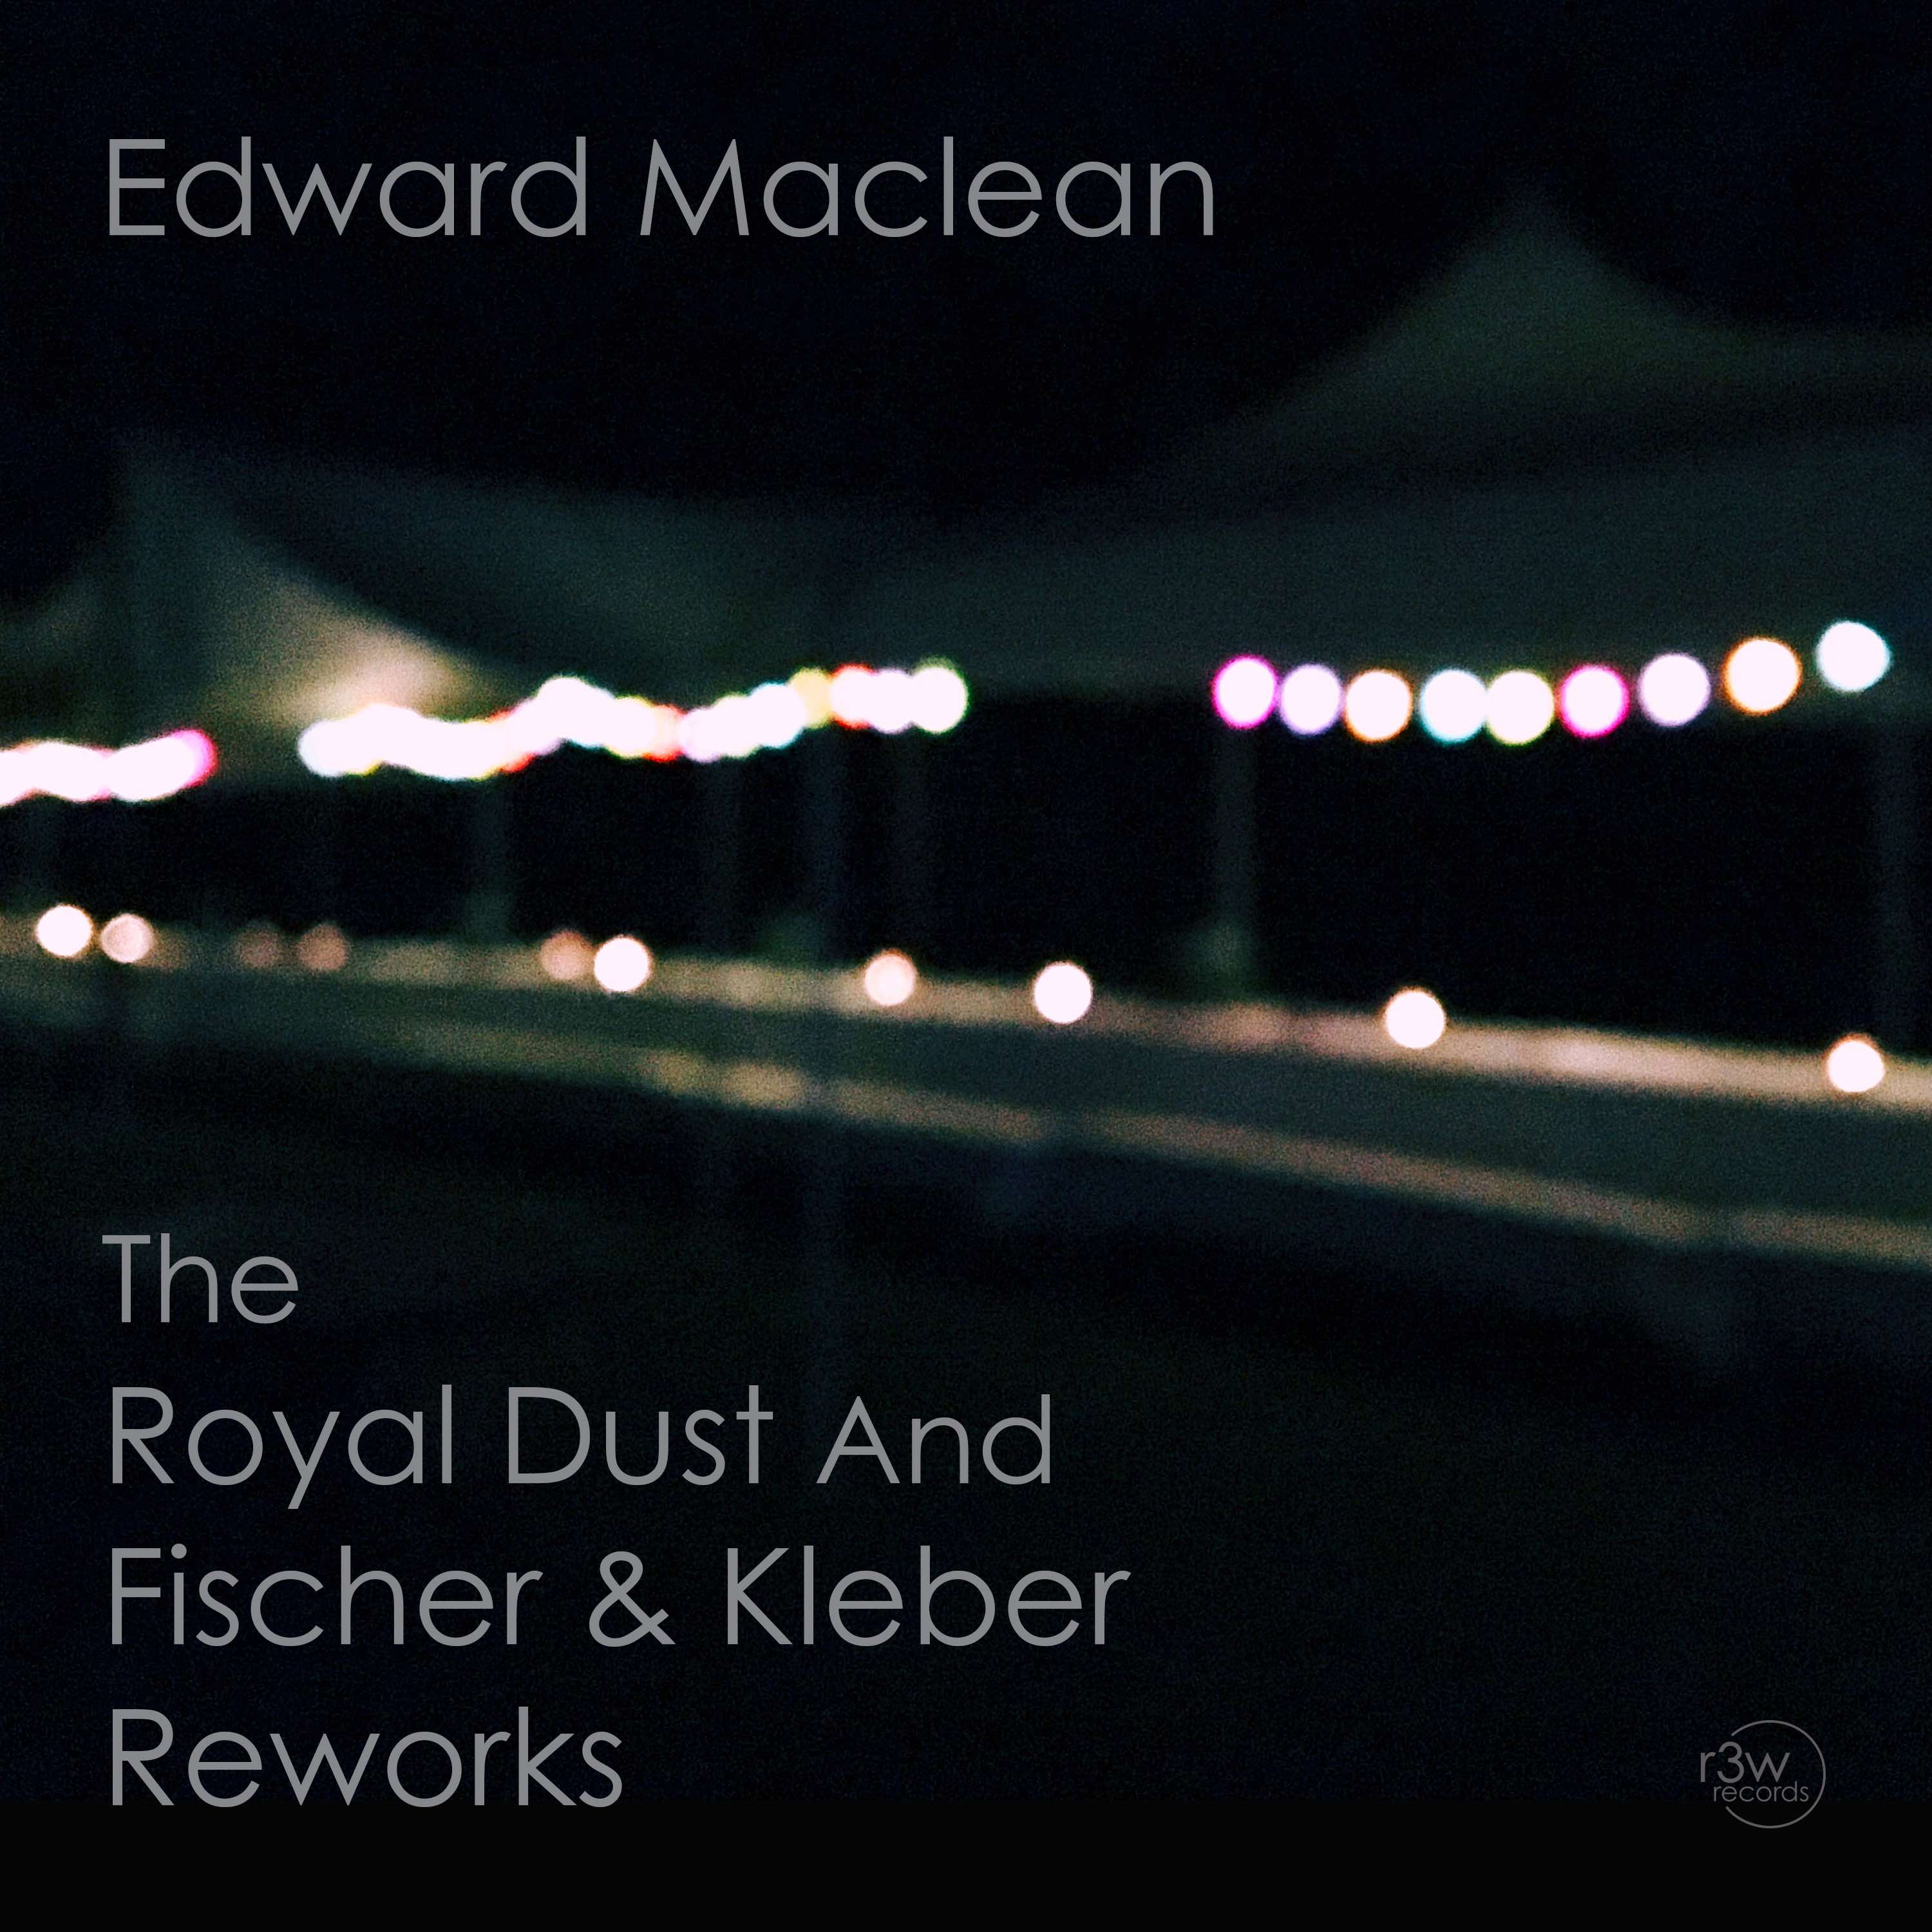 cd-cover-edward-maclean-The-Royal-Dust-And-Fischer-&-Kleber-Reworks-r3w -ecords-2018